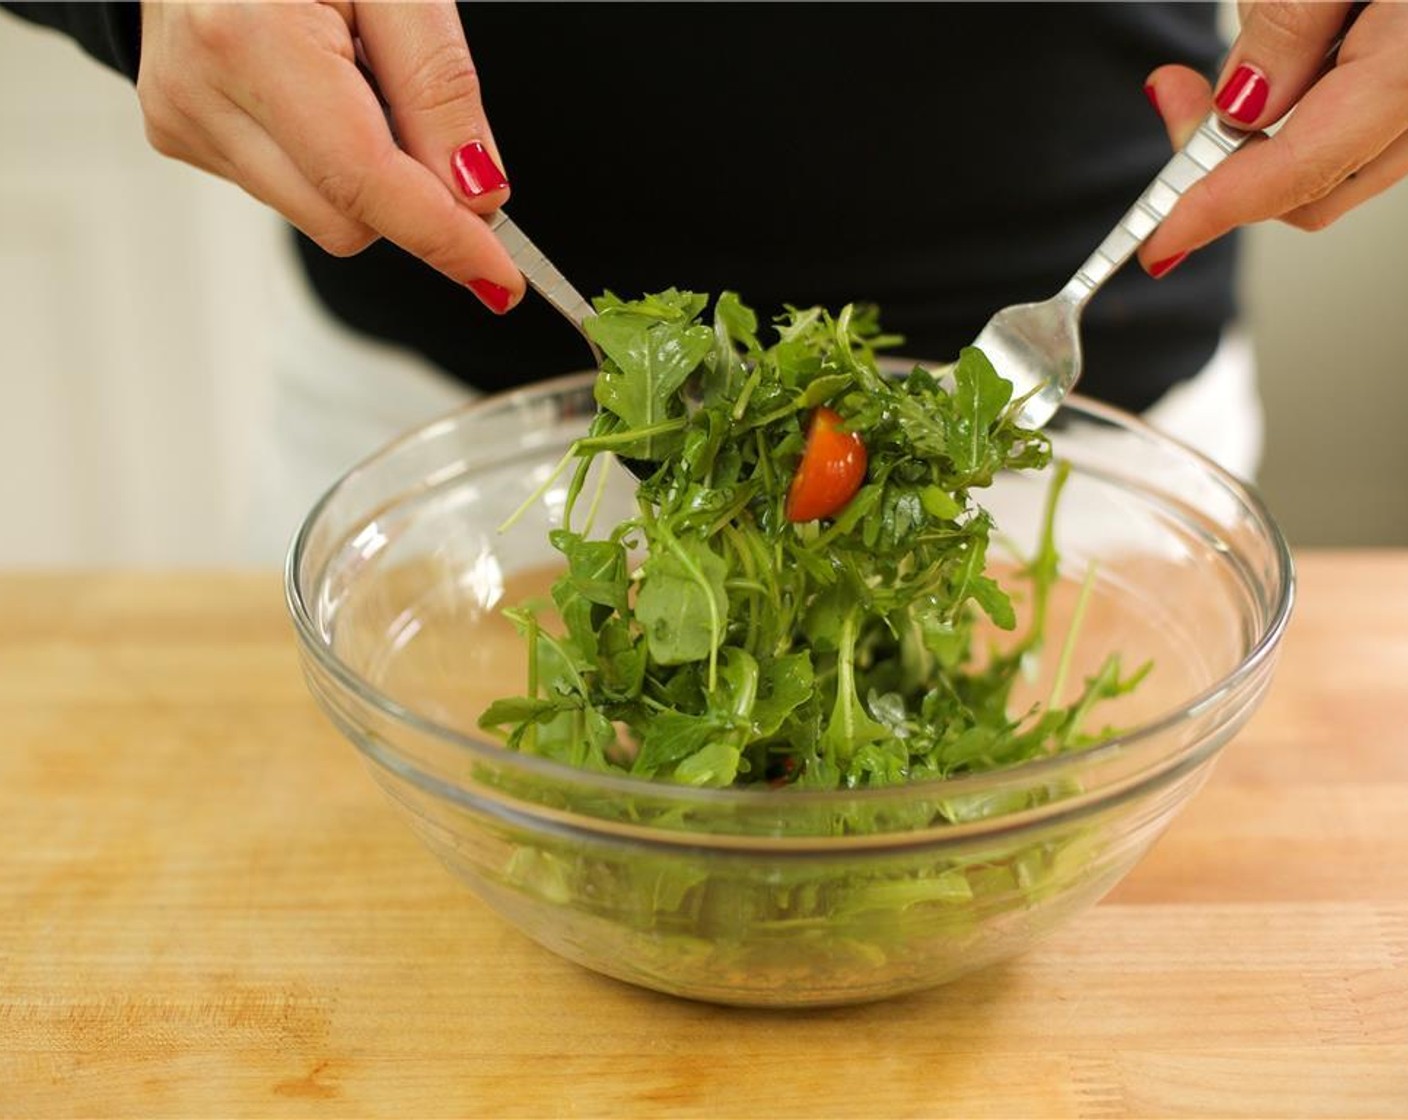 step 16 In a medium bowl, toss together the Arugula (5 2/3 cups), Cherry Tomato (1 cup) and dressing until well coated. Hold until plating.